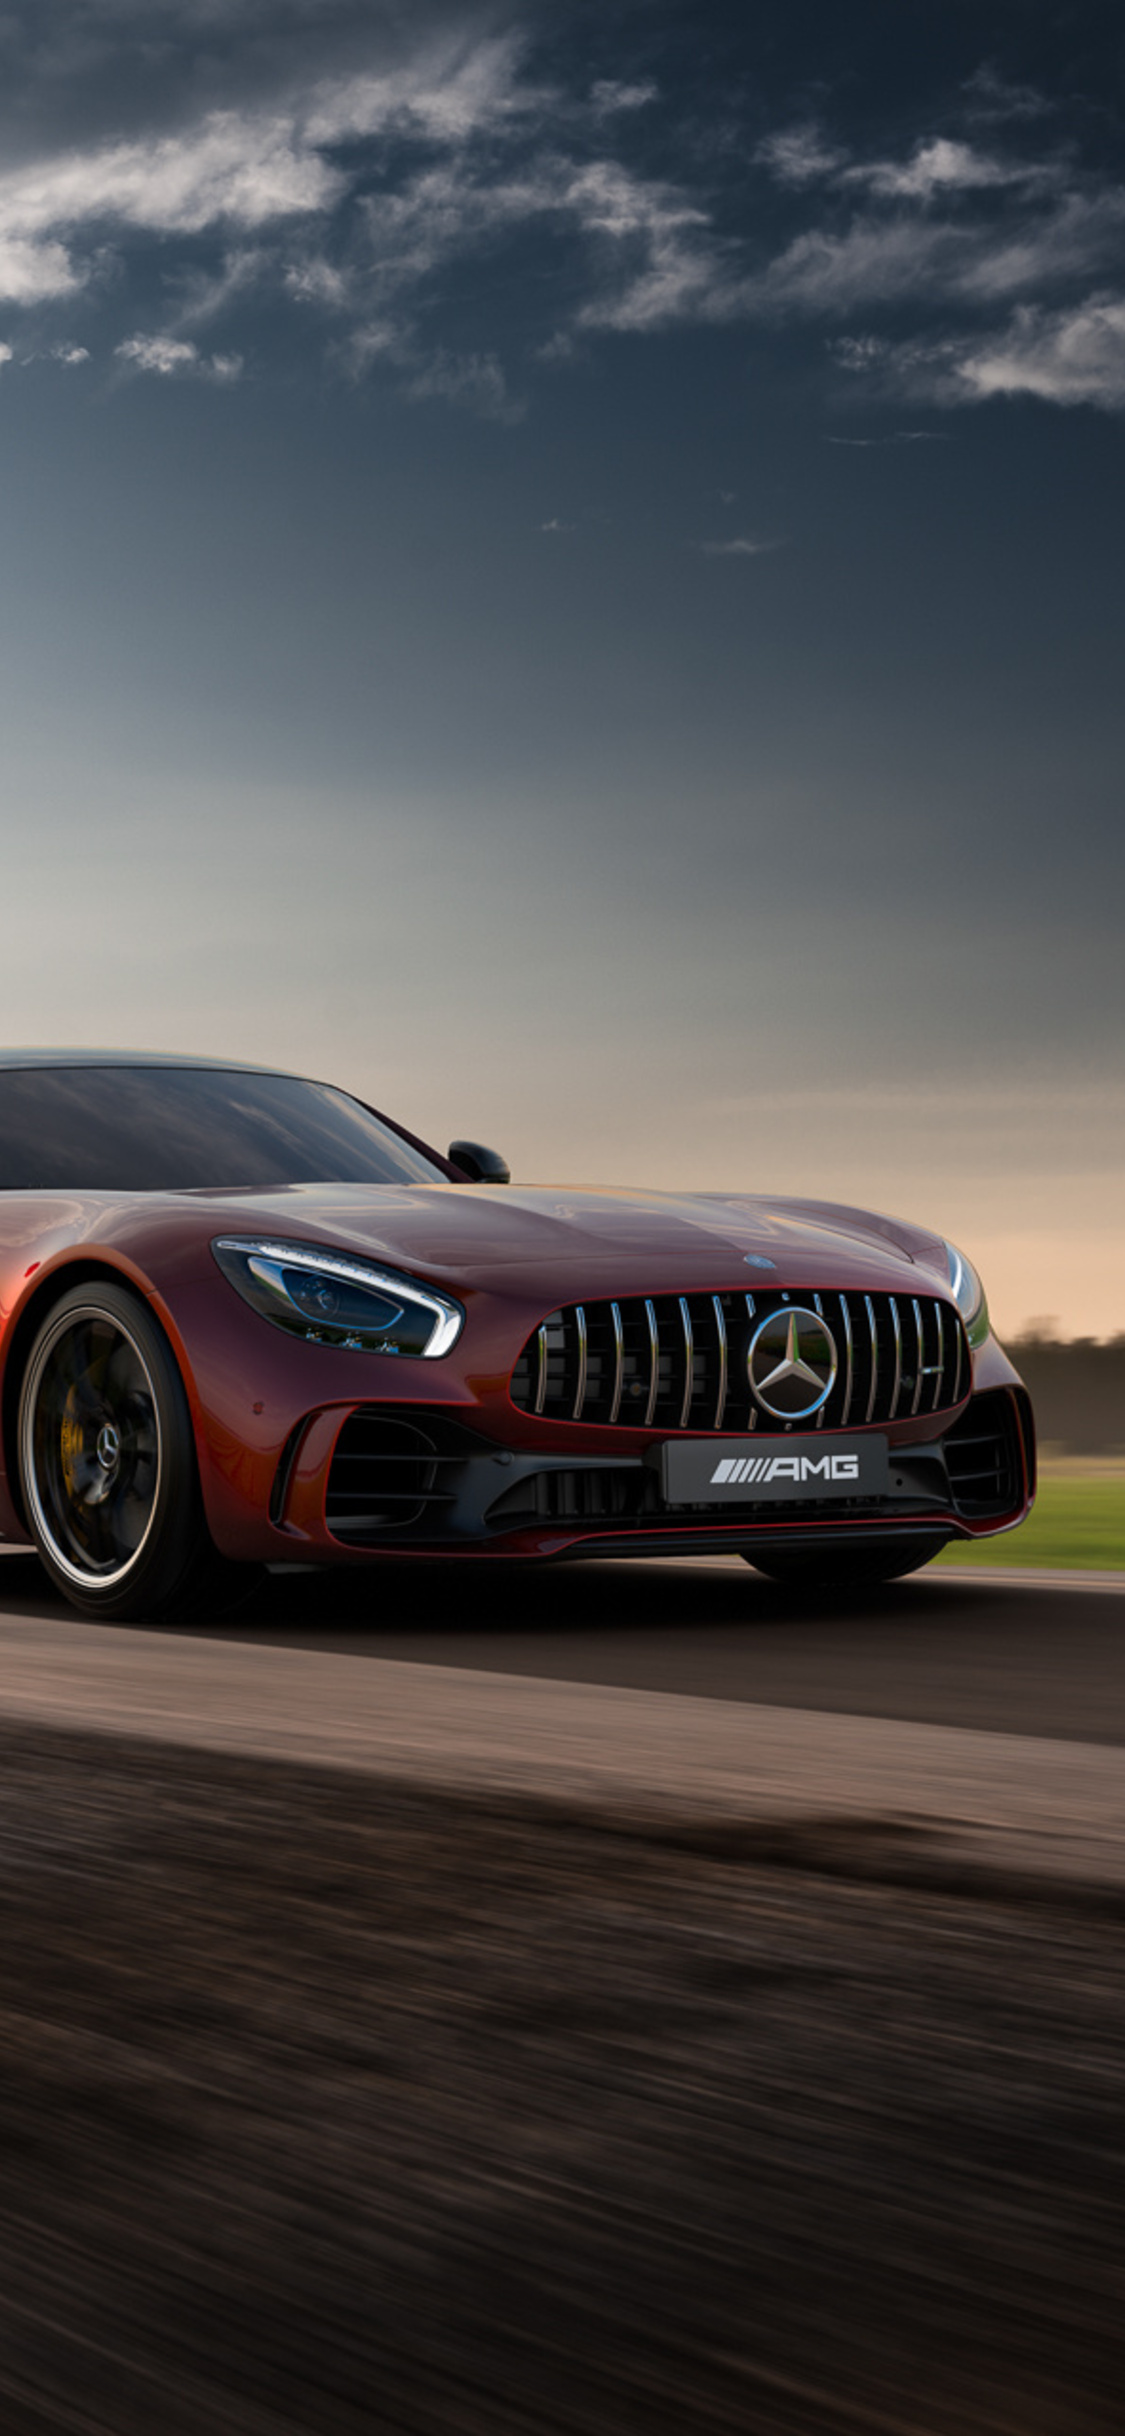 Mercedes Benz AMG GT R 2018 iPhone XS, iPhone iPhone X HD 4k Wallpaper, Image, Background, Photo and Picture